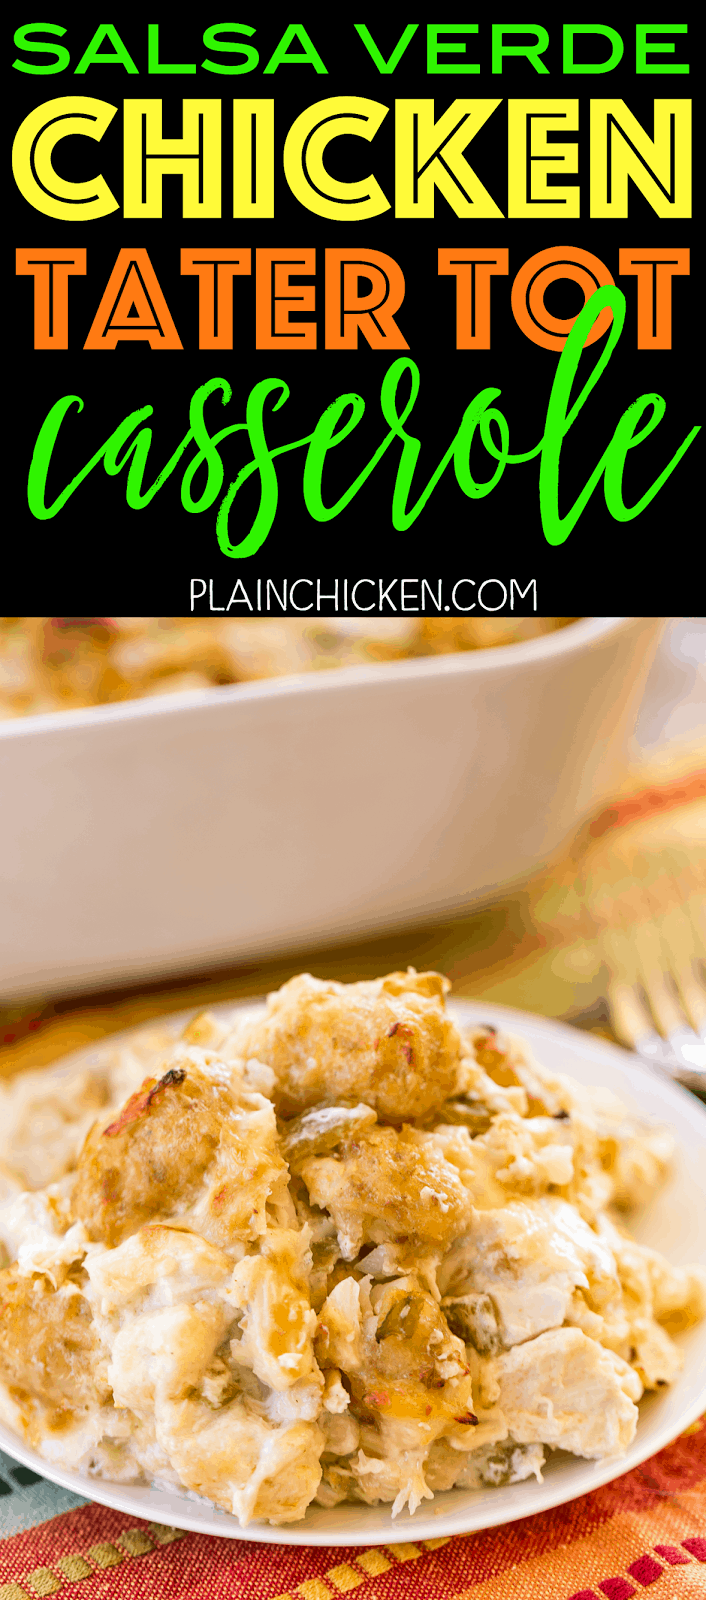 Salsa Verde Chicken Tater Tot Casserole - ridiculously good! Everyone LOVES this easy Mexican casserole!! Chicken, green chiles, sour cream, chicken broth, cumin, flour and butter. No cream of anything soup! We make this at least once a month! SO good!!